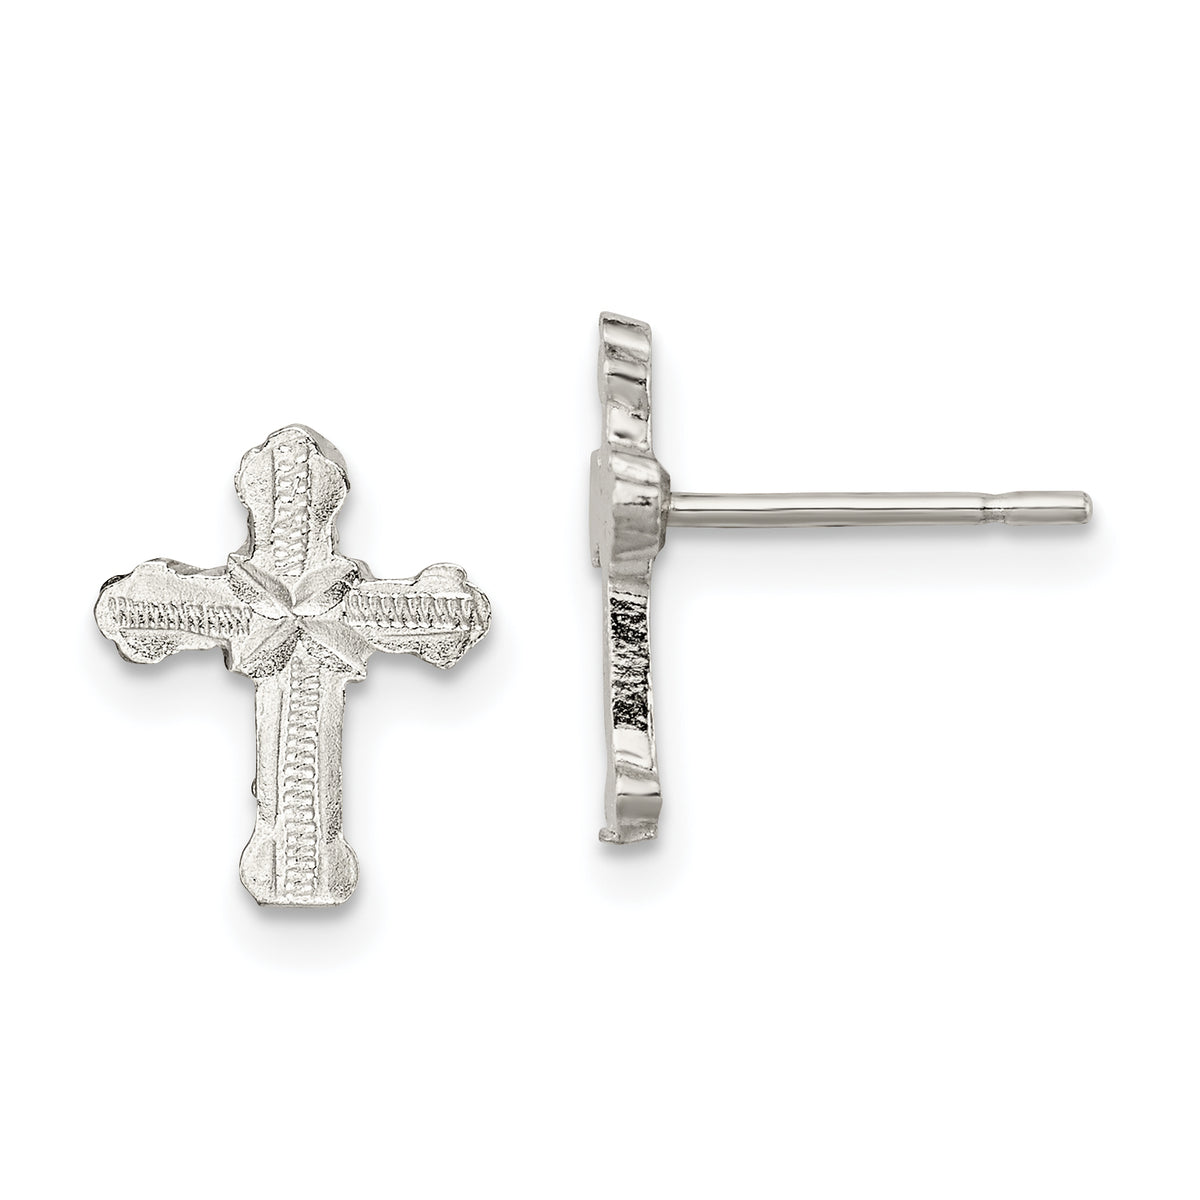 Sterling Silver Polished & Textured 'X' Cross Post Earrings